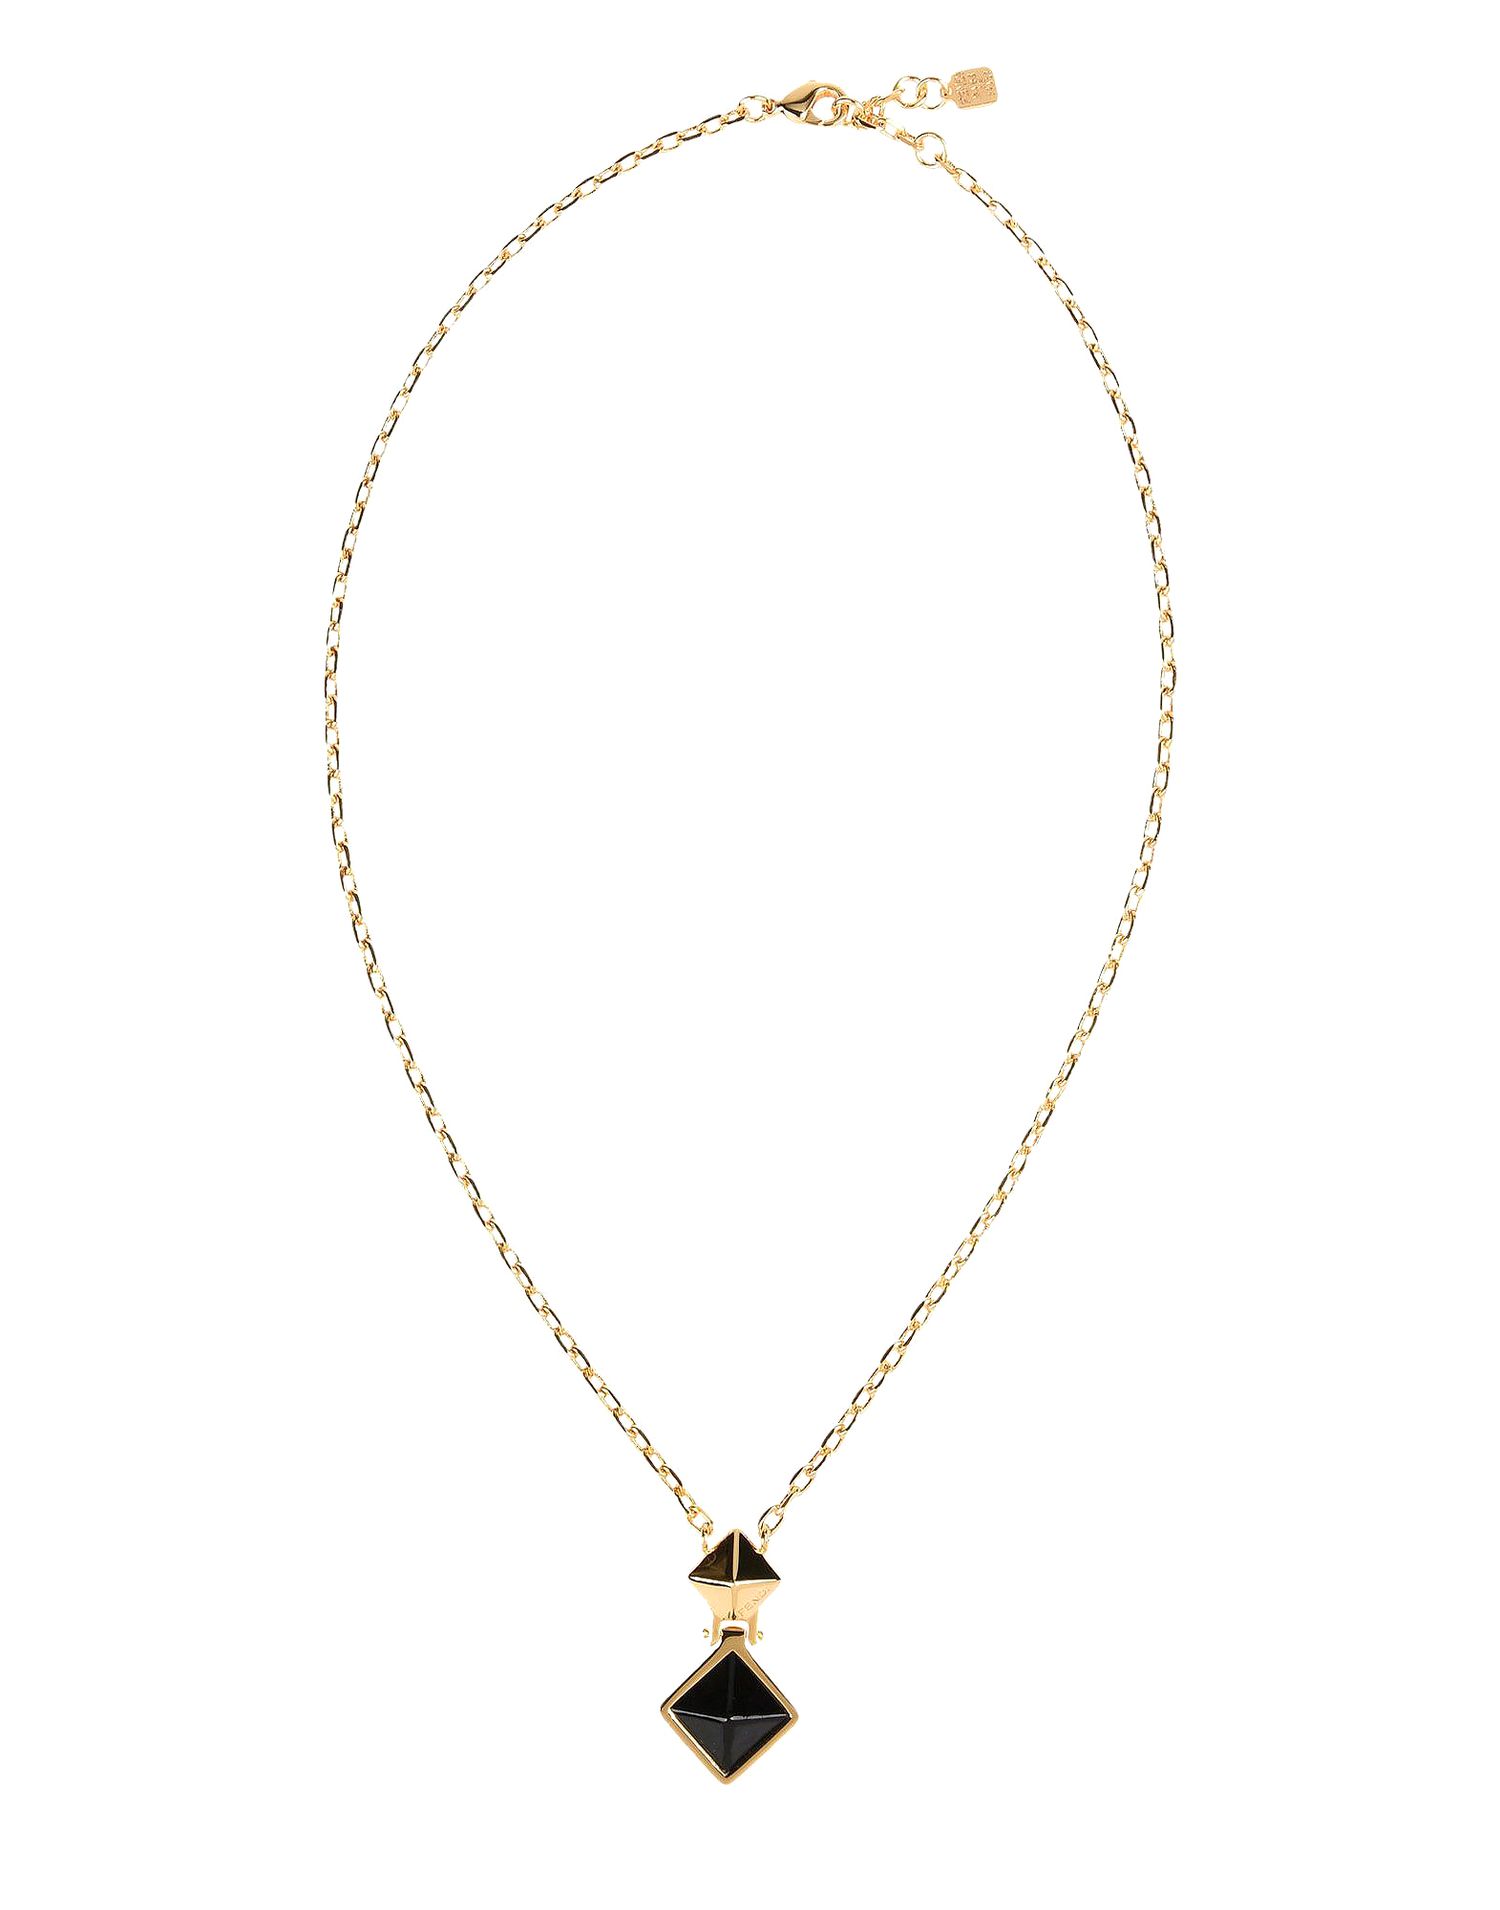 BLACK AND GOLD PYRAMID CHAIN NECKLACE